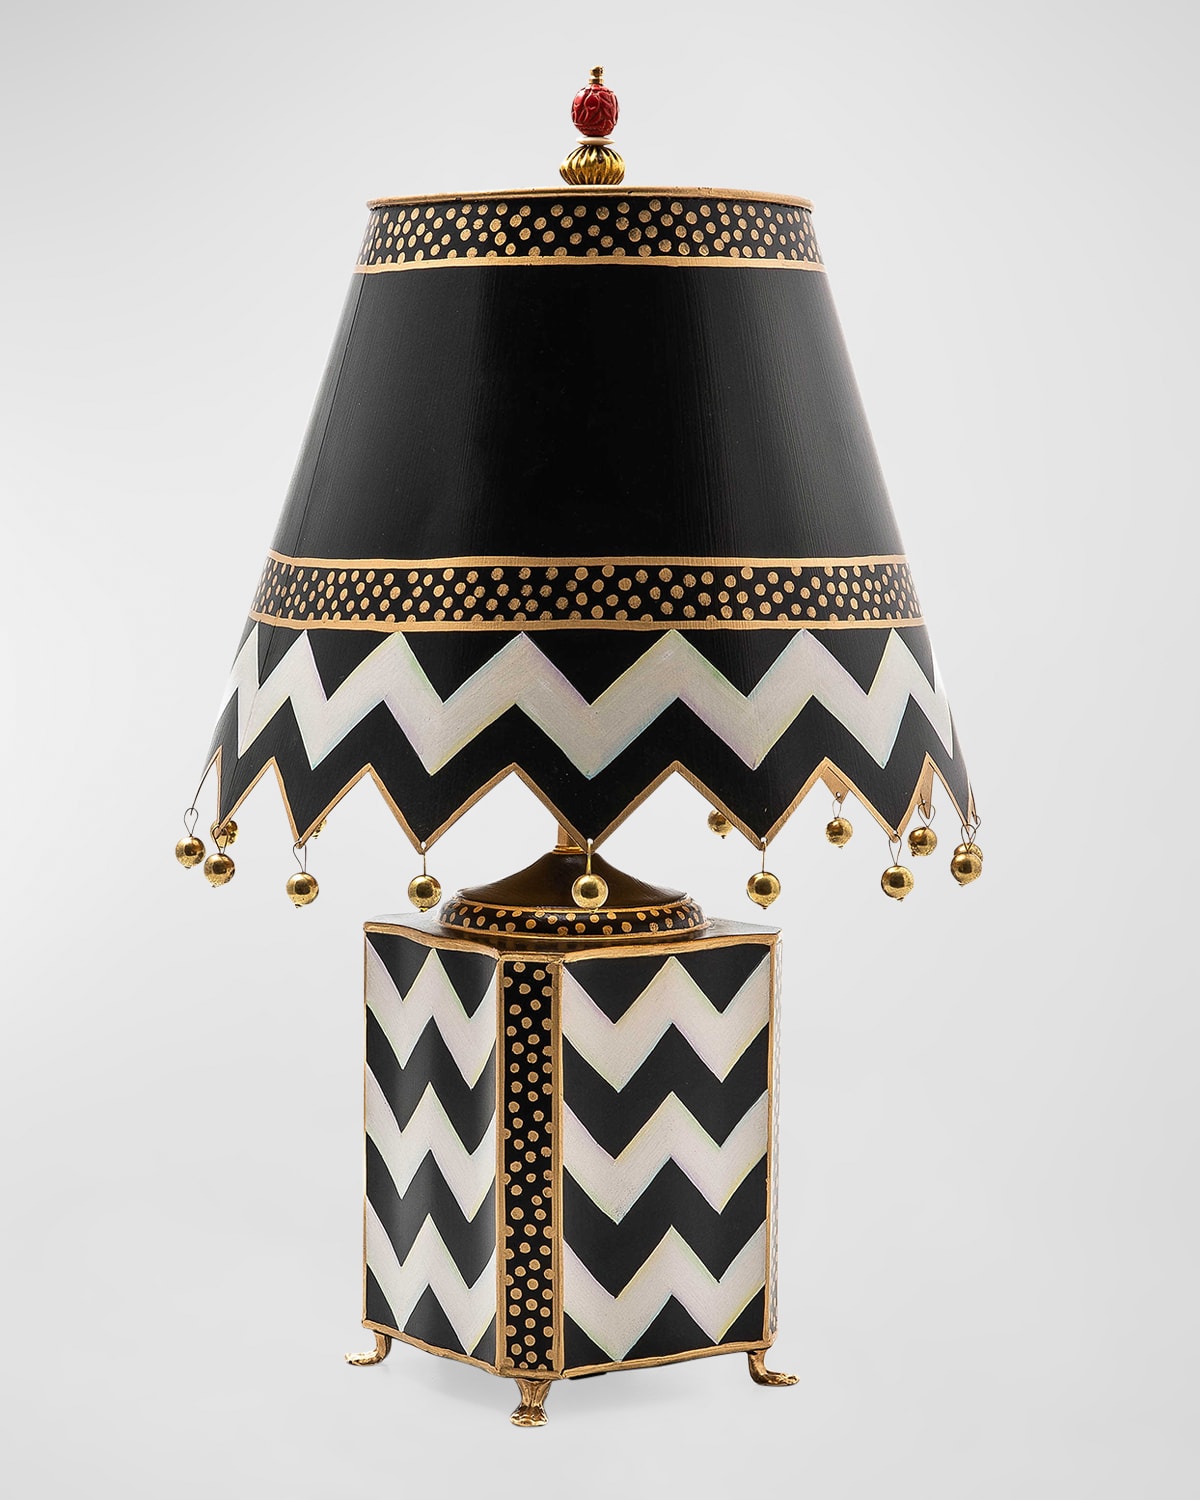 Mackenzie-childs Courtly Zig Zag Table Lamp In Multi